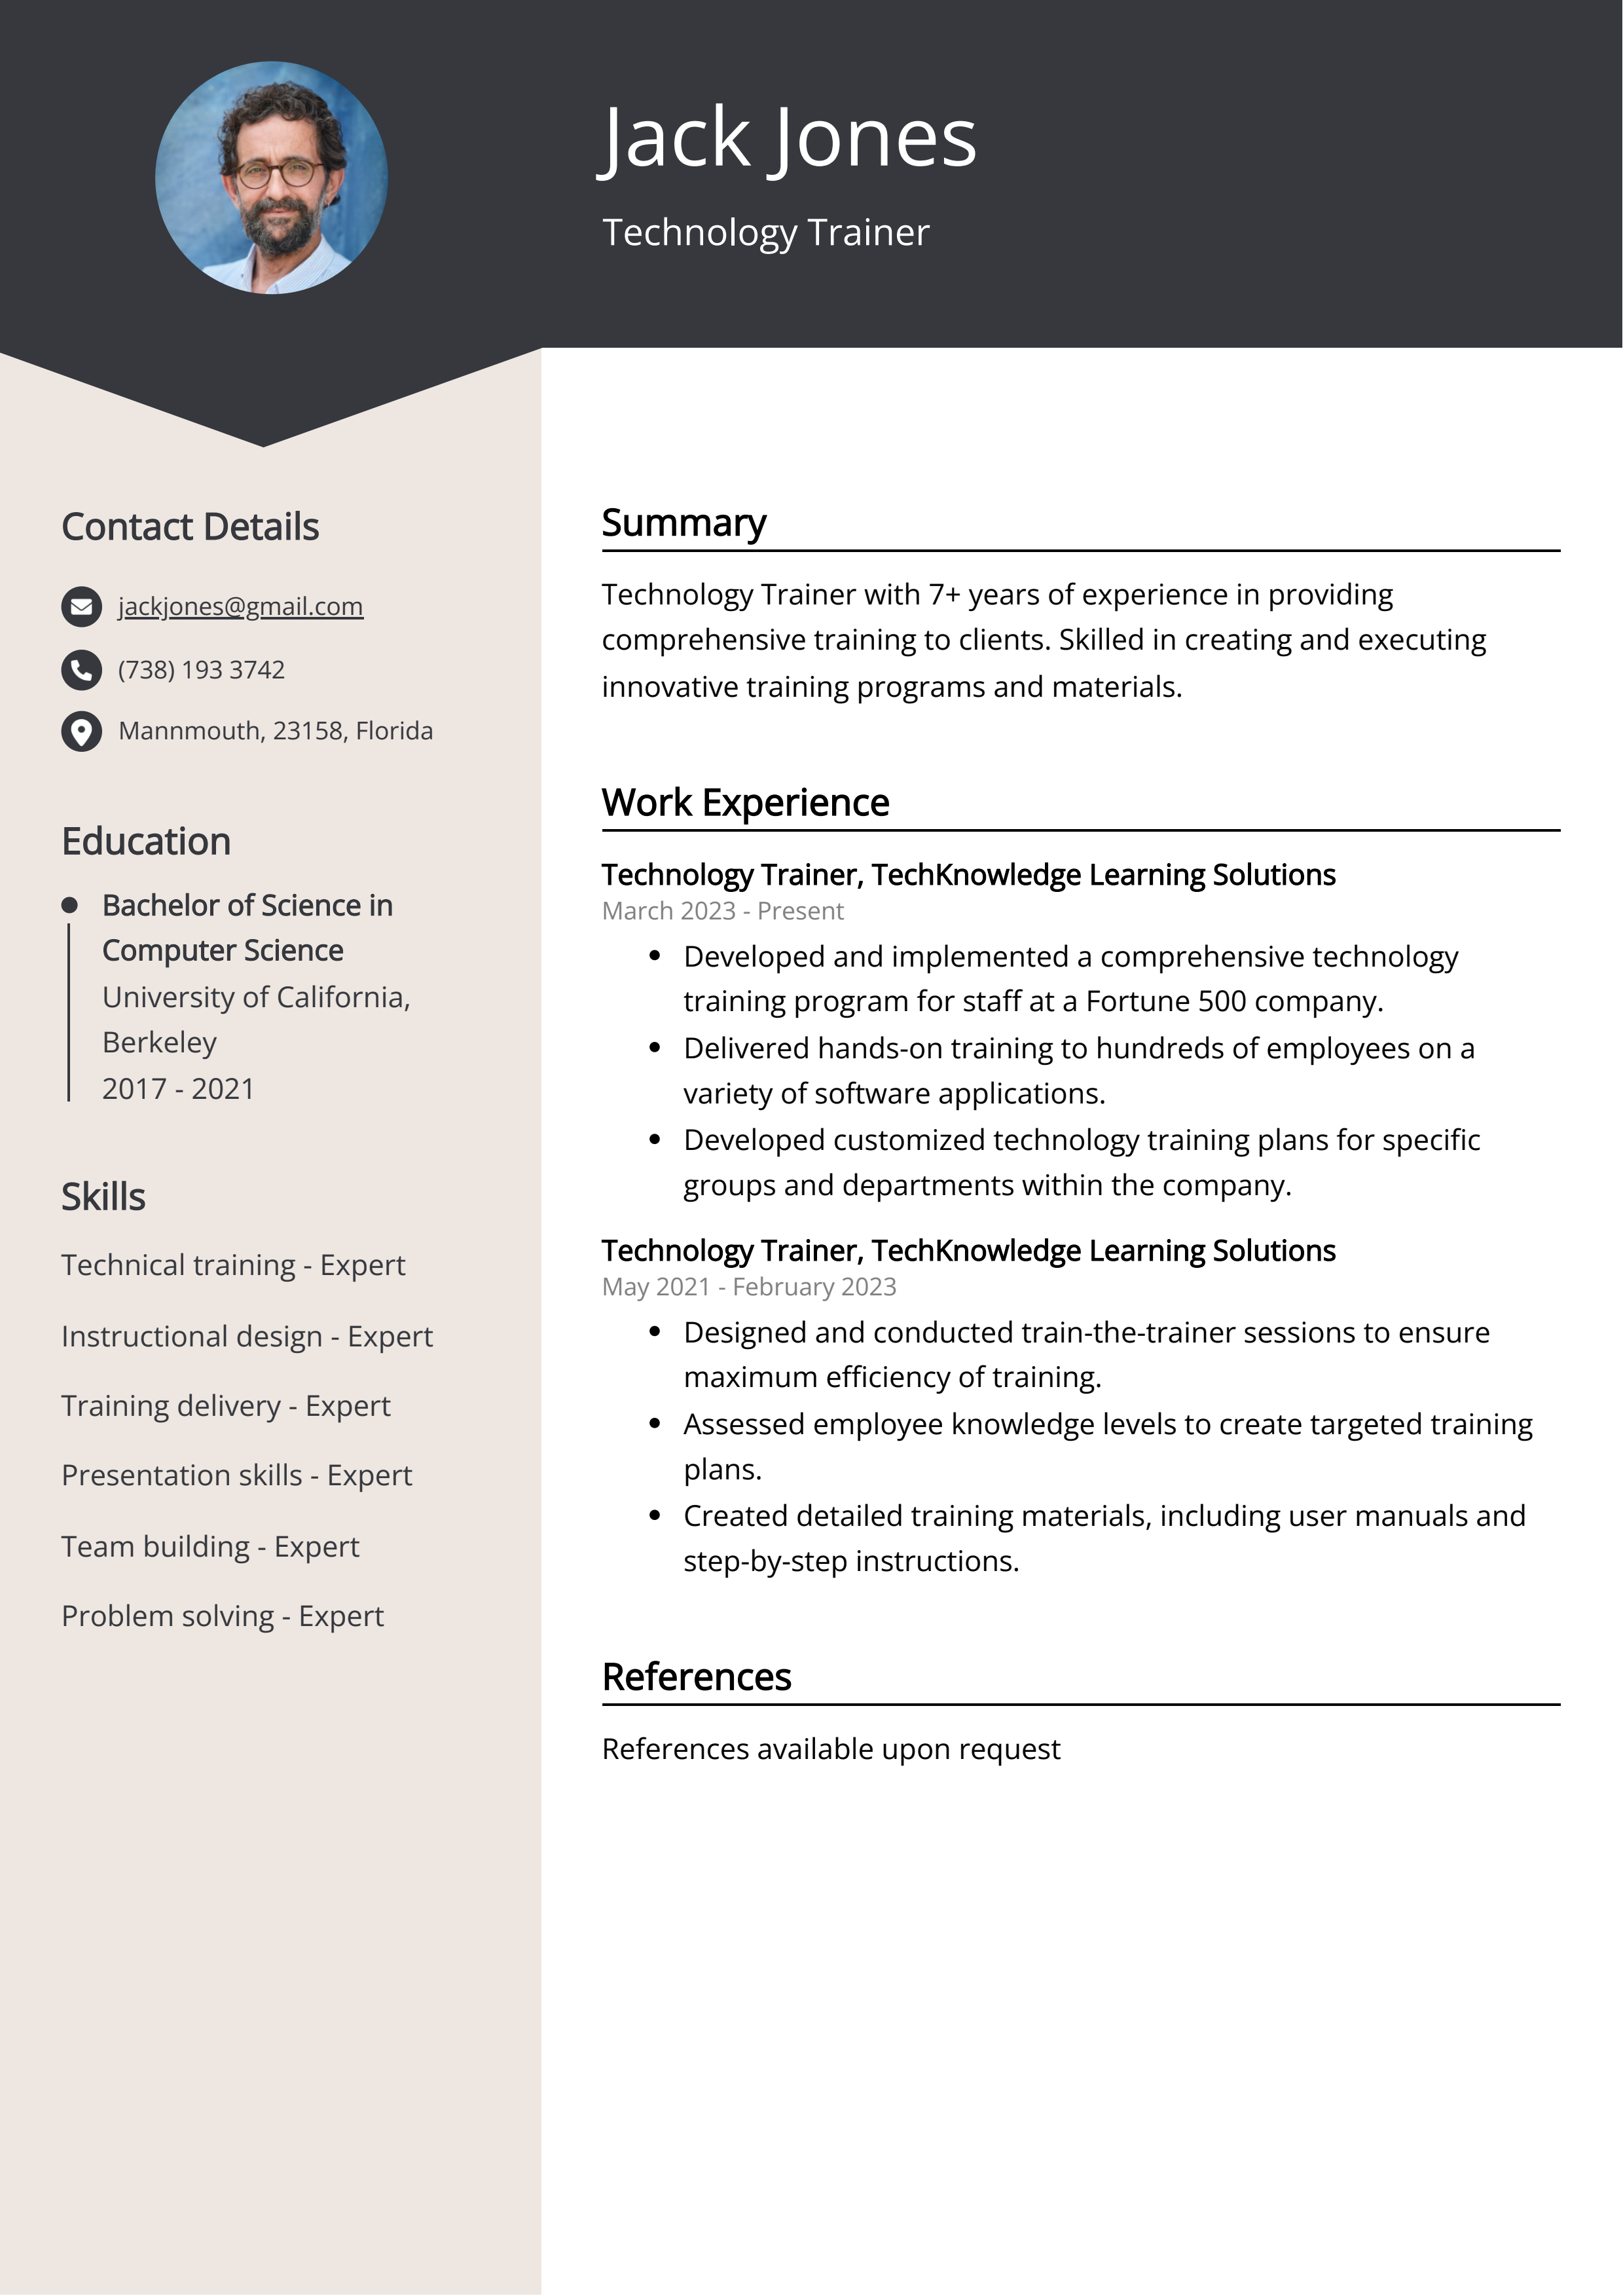 Technology Trainer CV Example